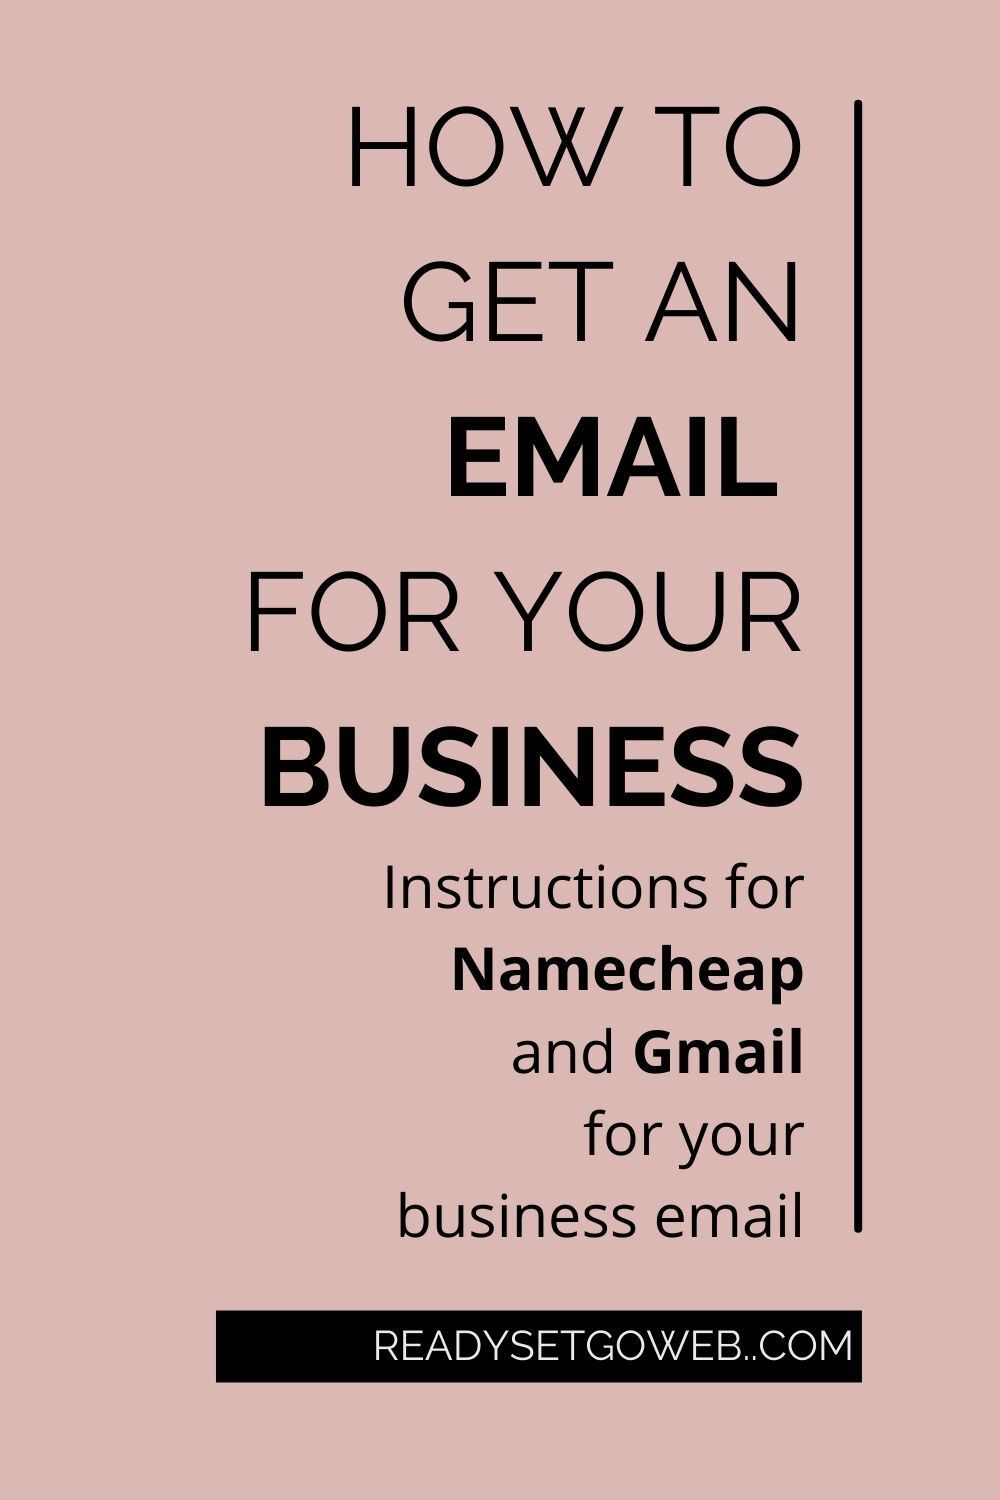 How to get an email for your business